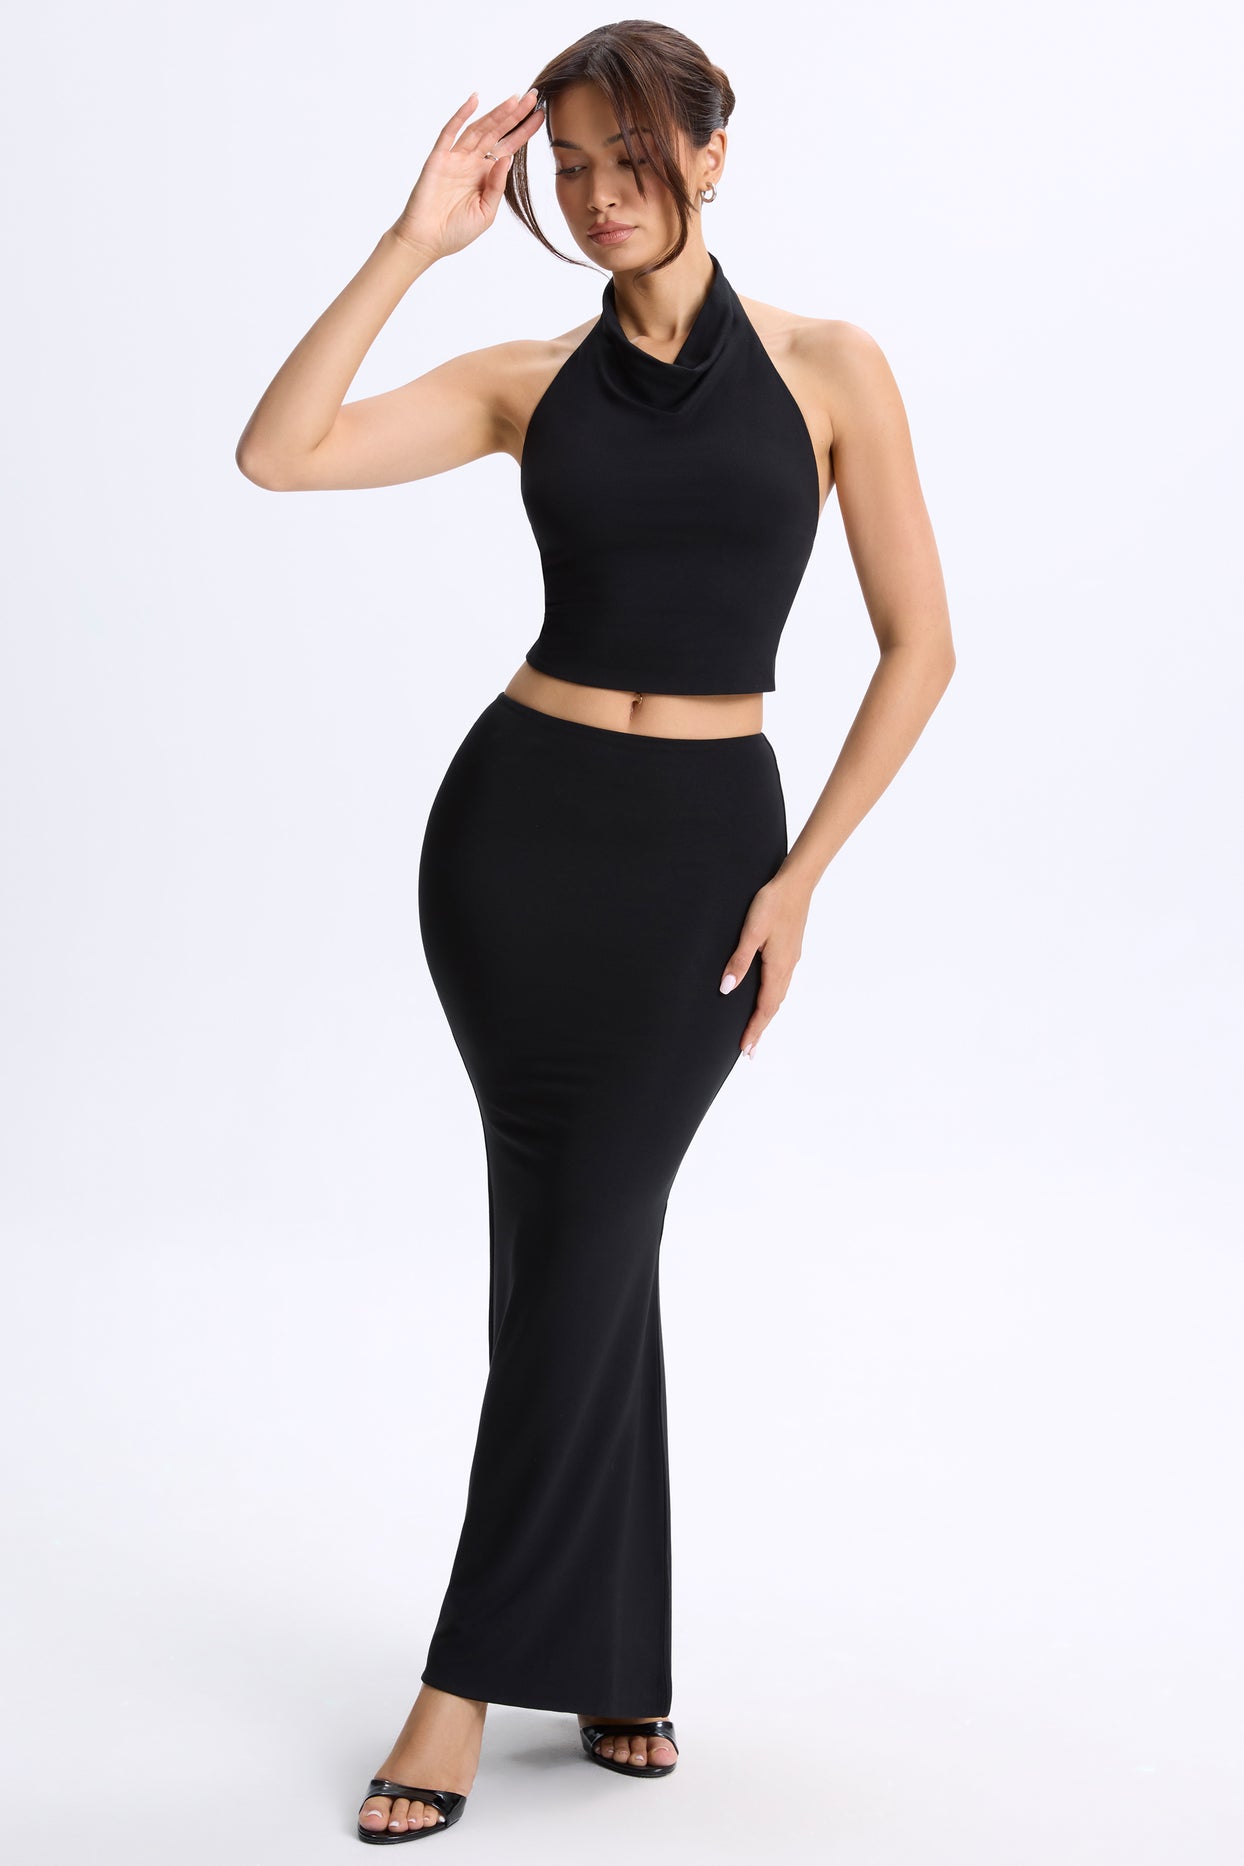 Low-Rise Maxi Skirt in Black